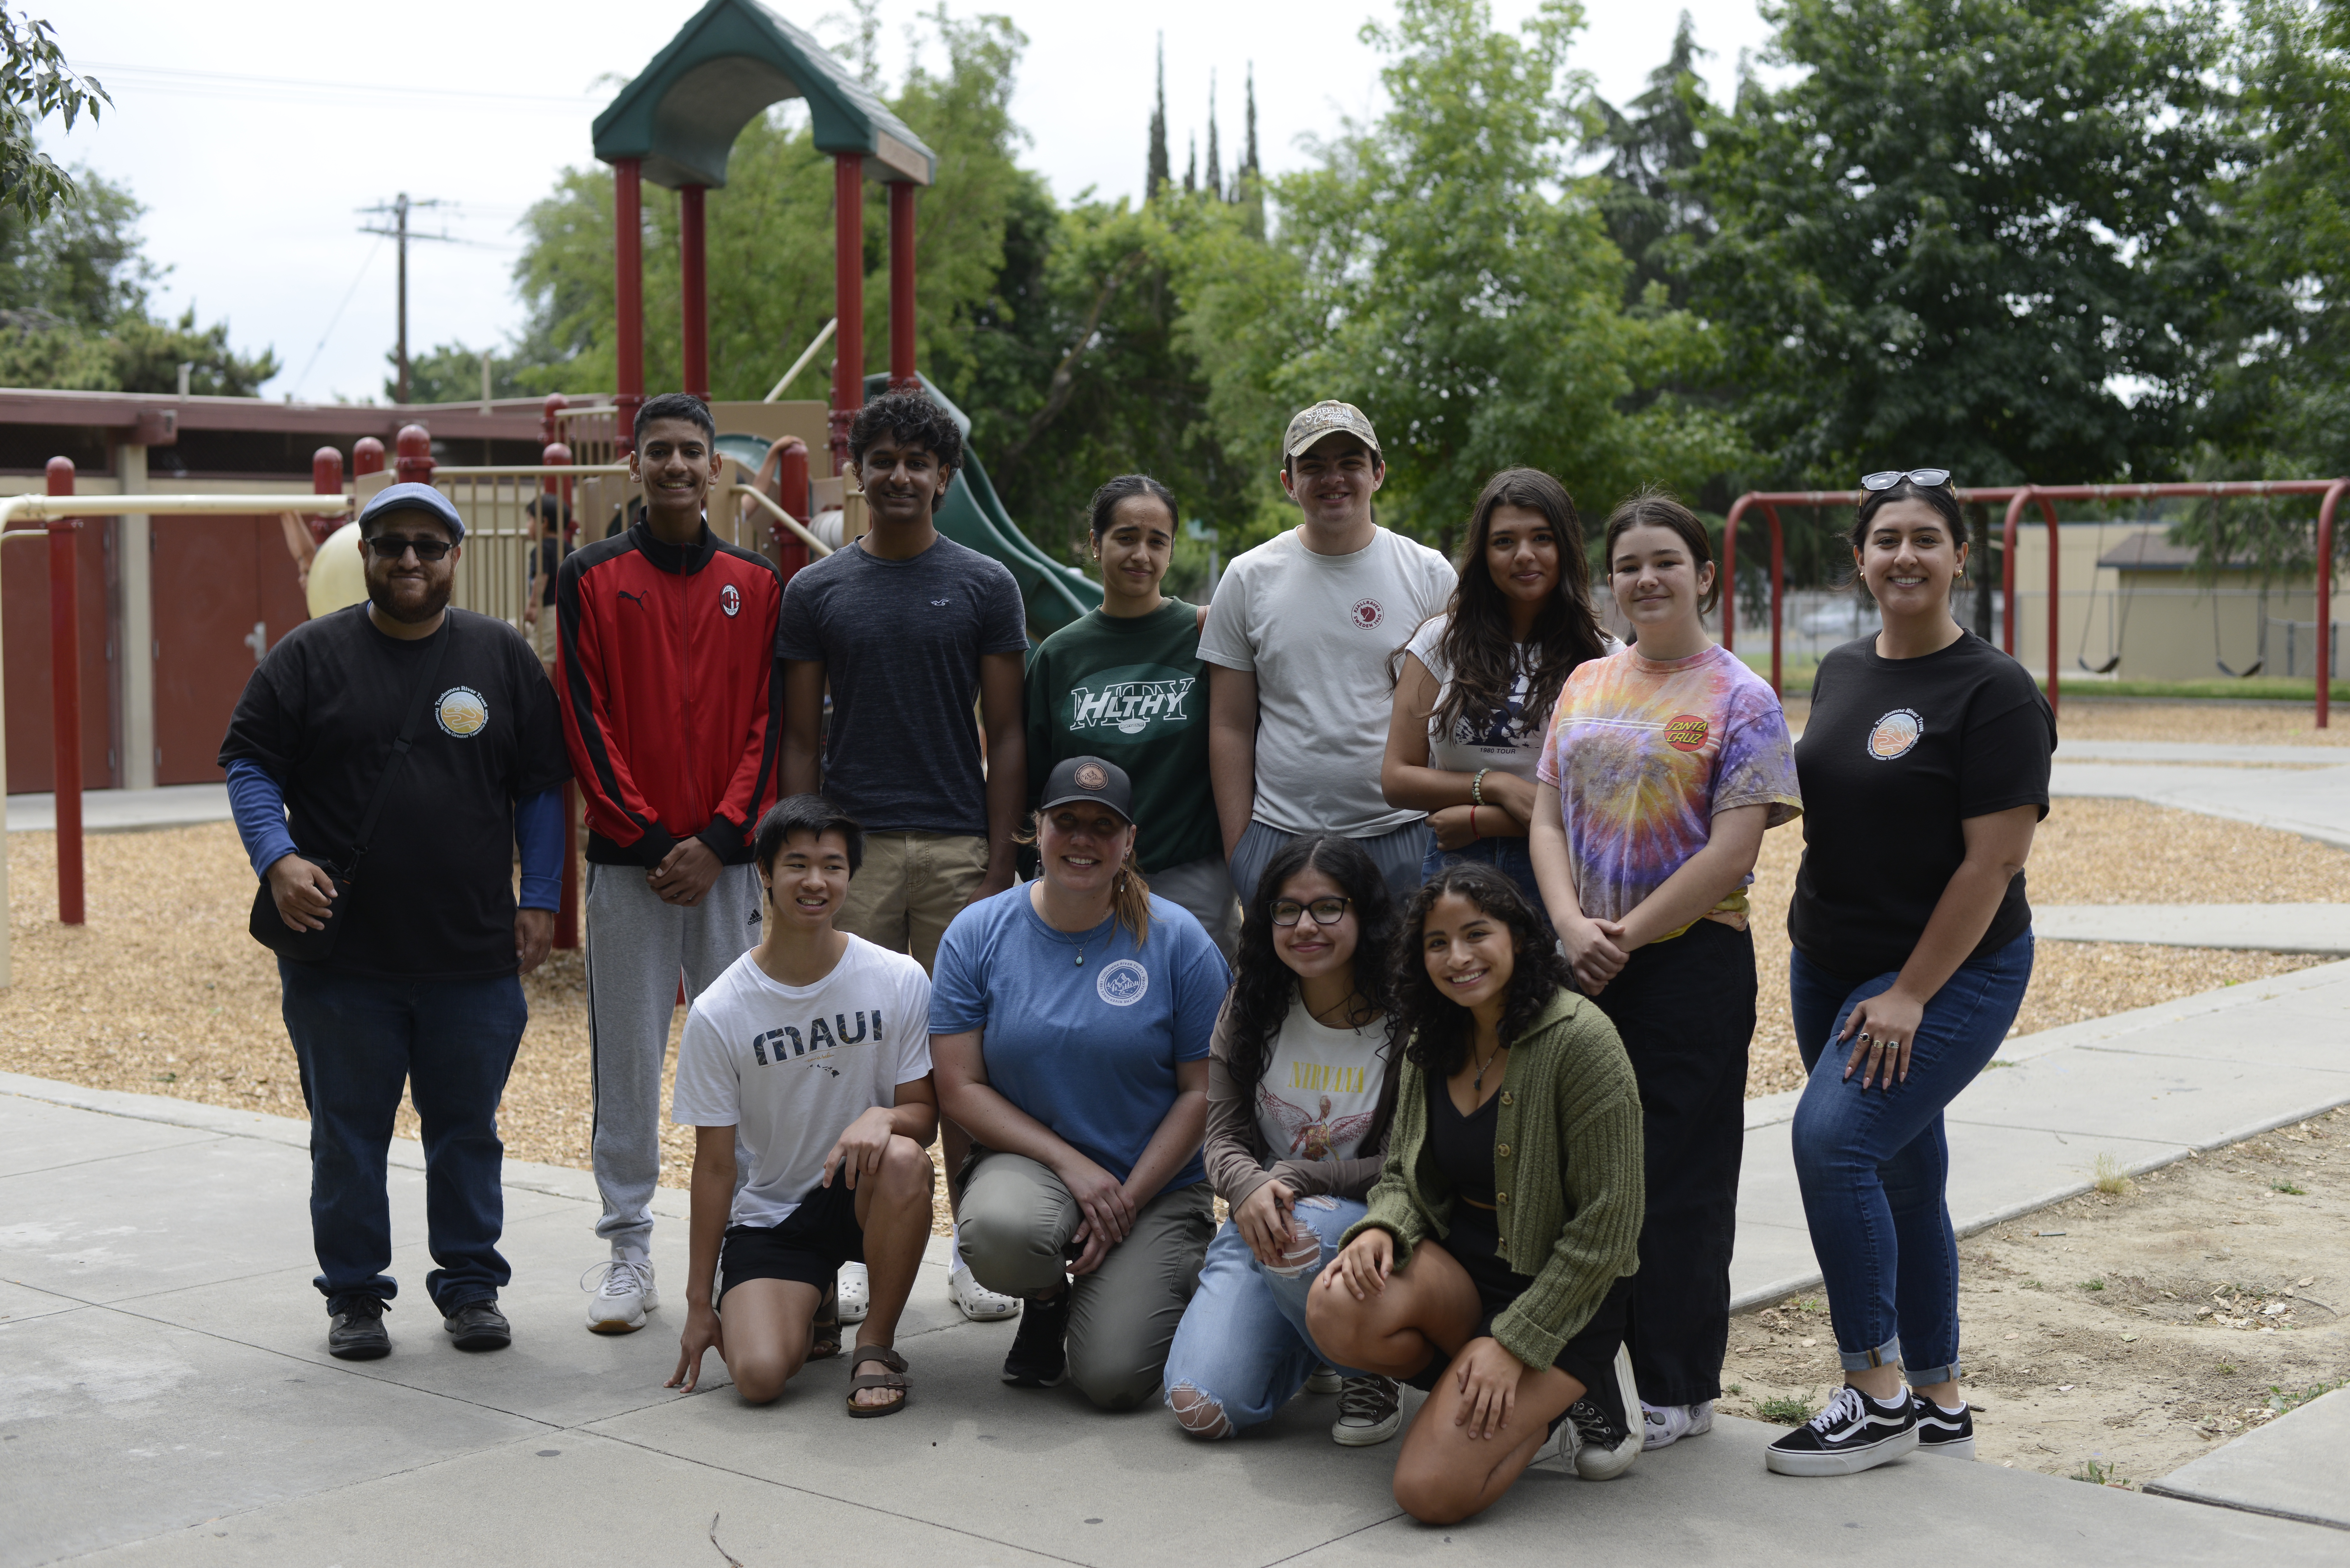 Youth Leaders for TRT’s Modesto Park Equity Initiative Host Community Day